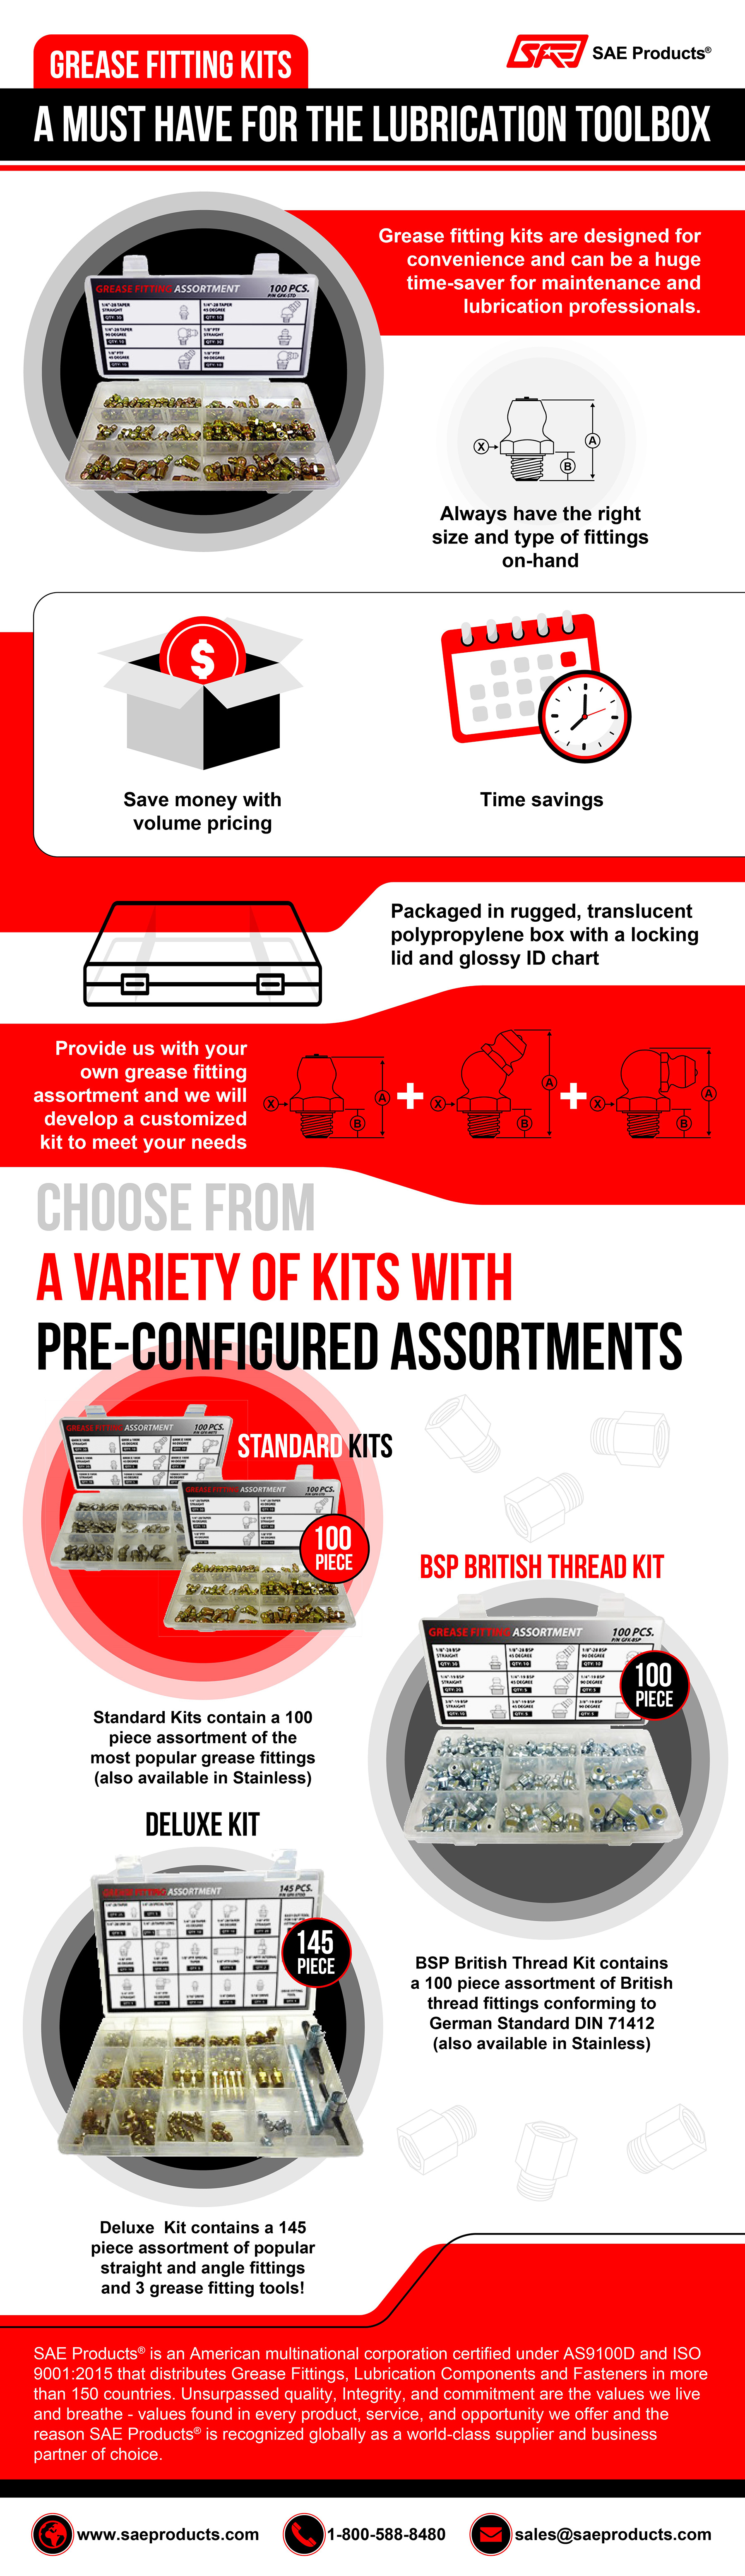 Grease Fitting Kits Infographic